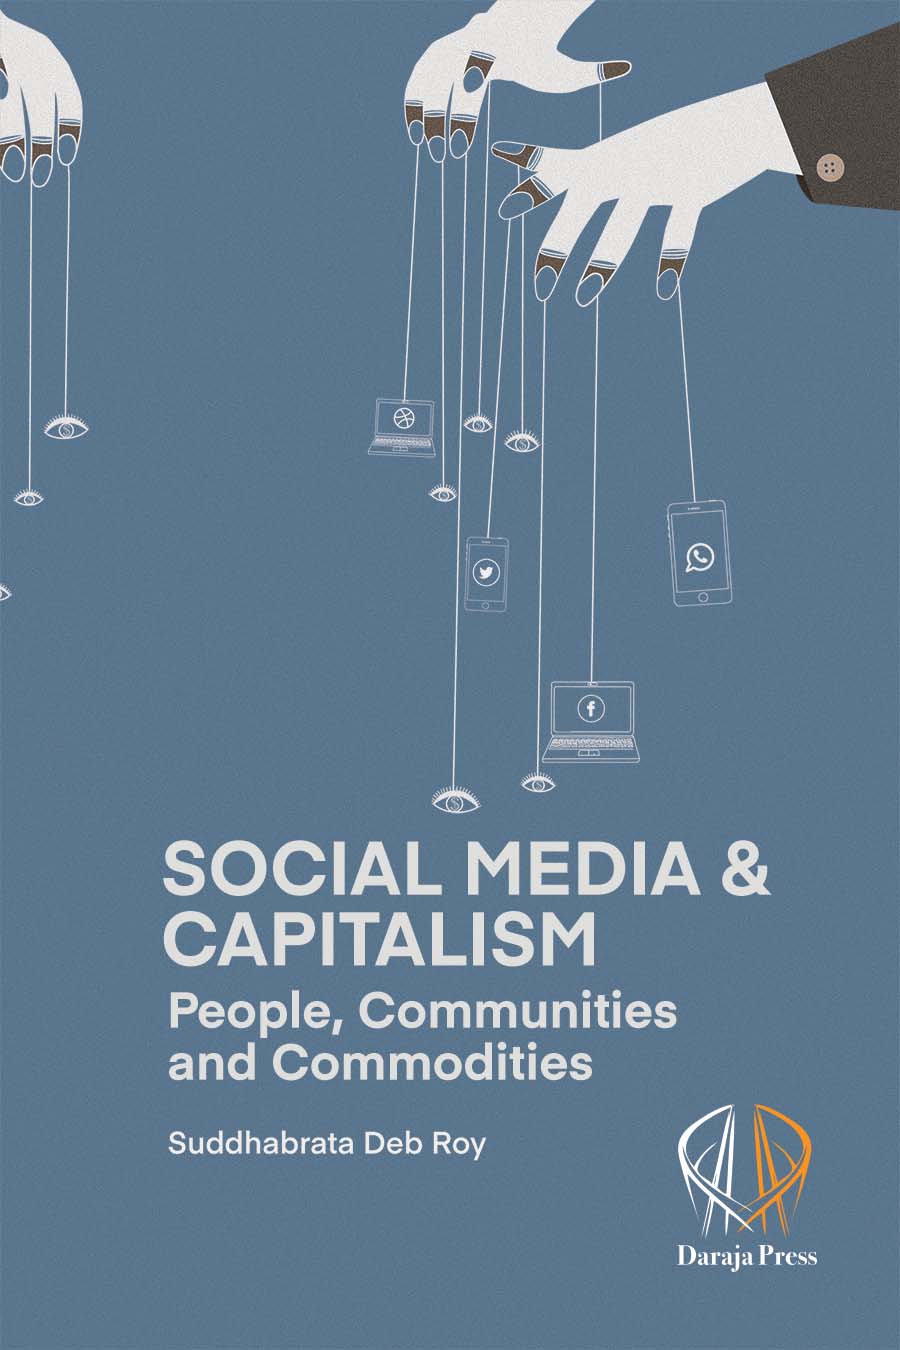 Social Media and Capitalism: People, Communities and Commodities